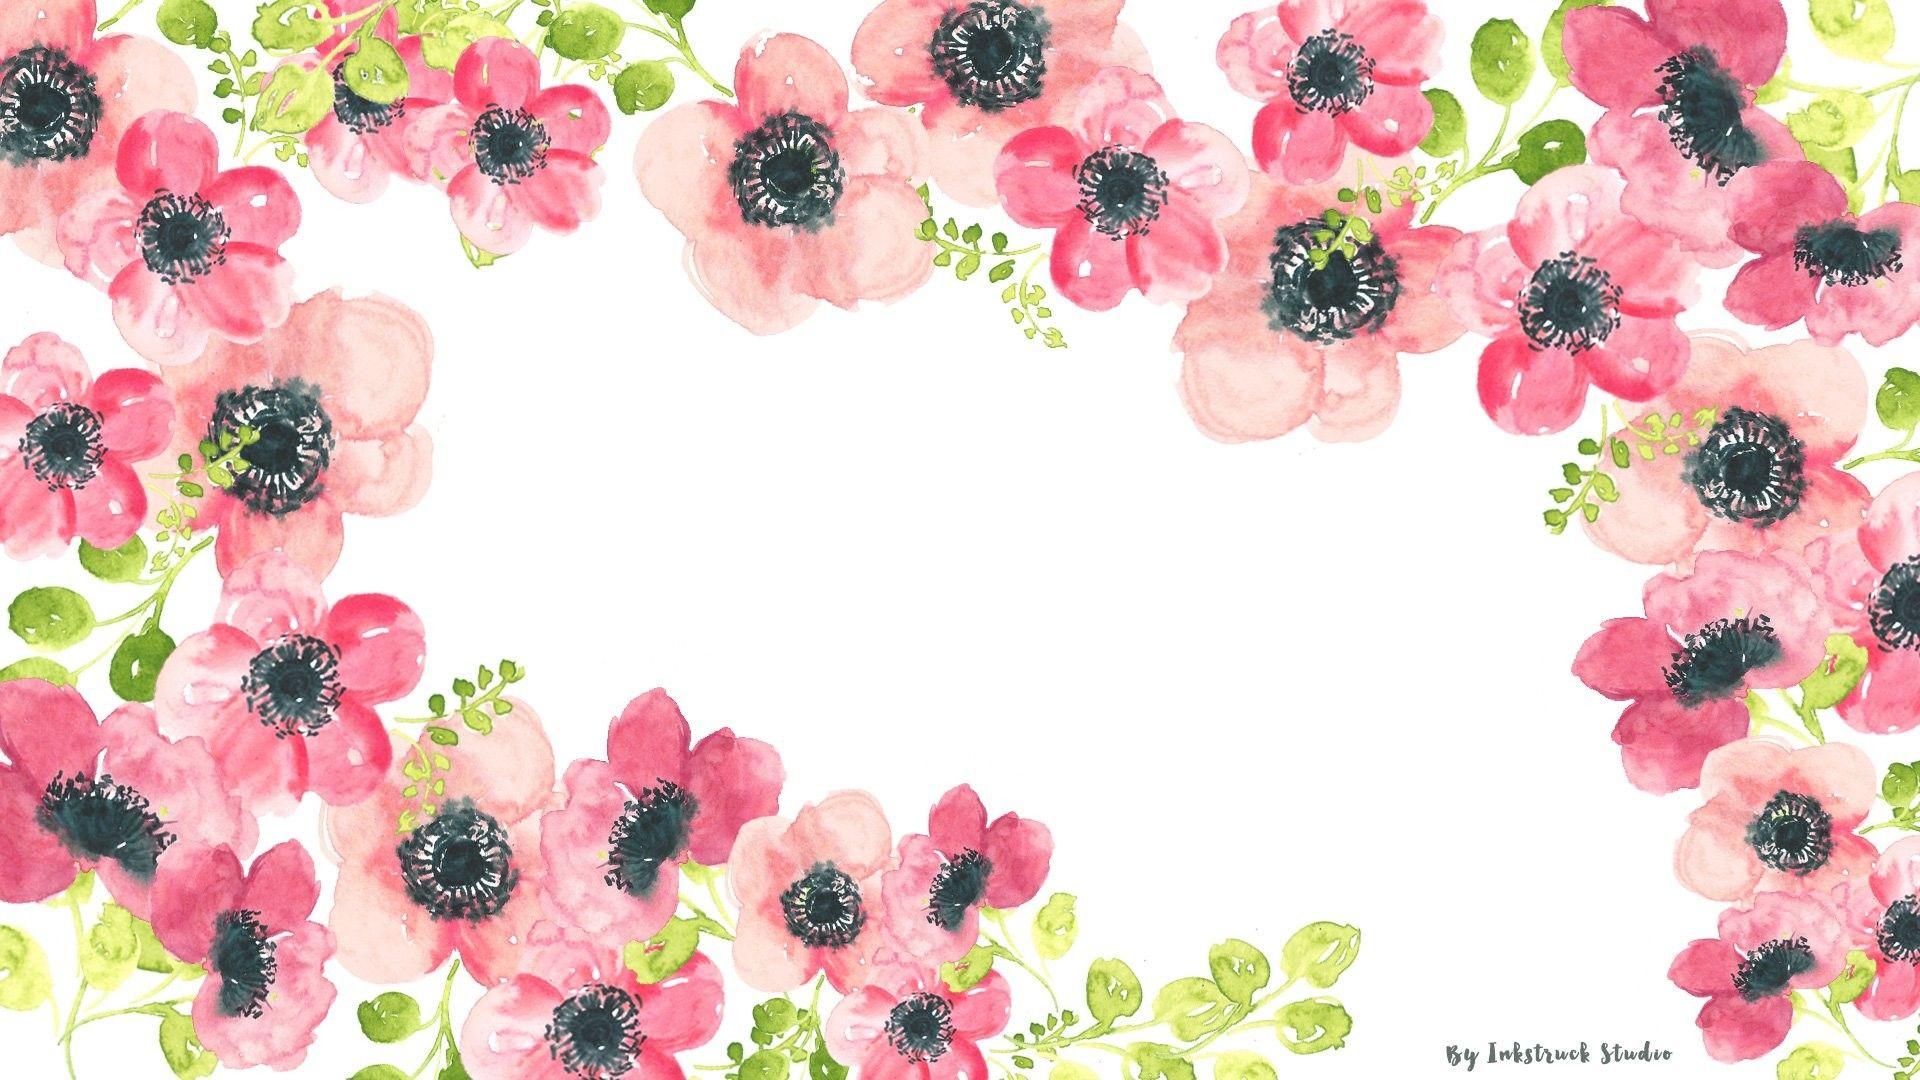 Watercolor Style Floral Wallpaper 1920x1080